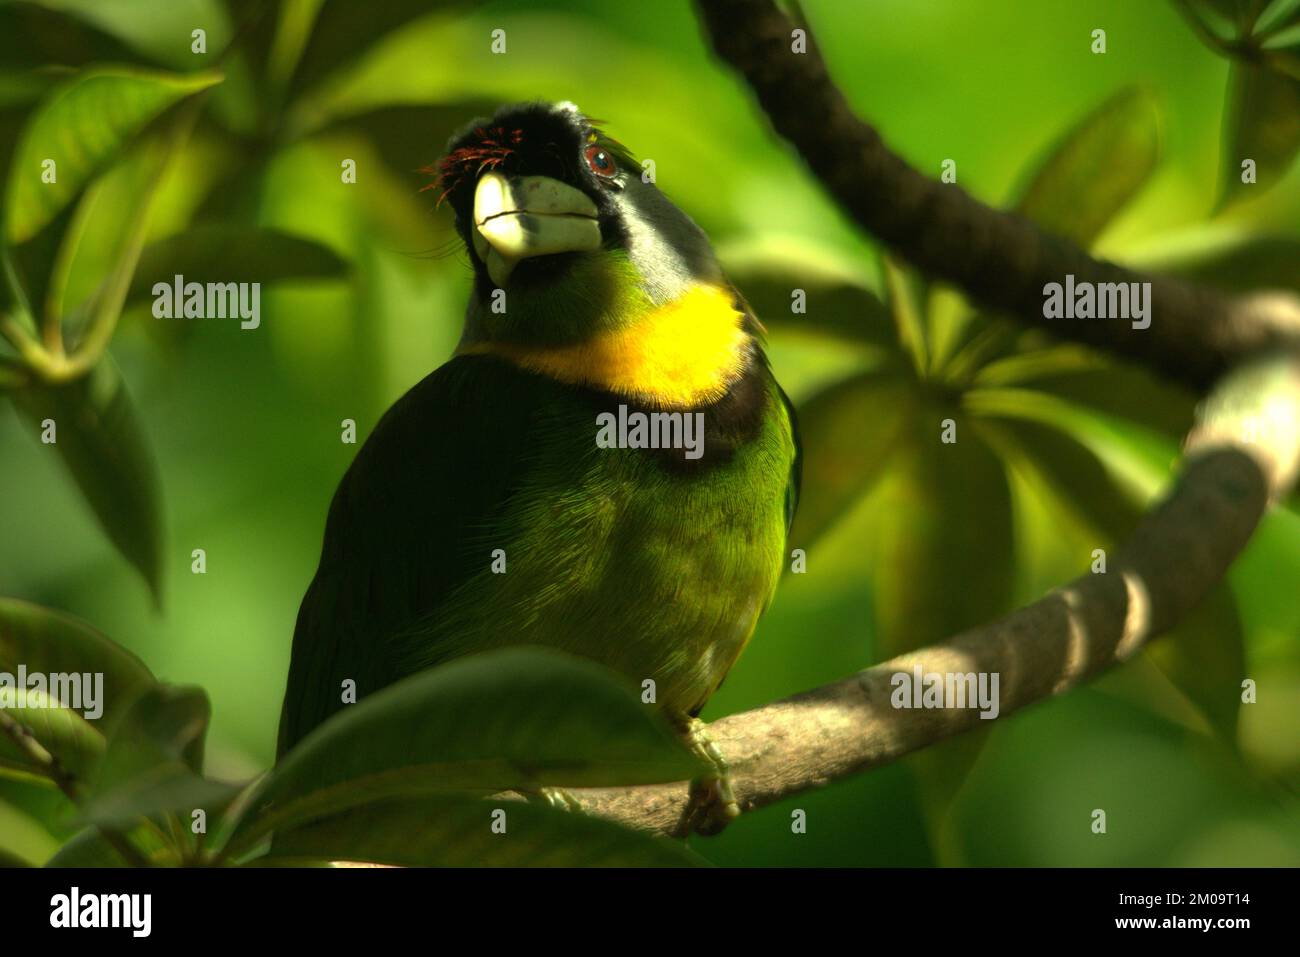 A closeup shot of a beautiful green Fire-tufted barbet surrounded by green leaves Stock Photo